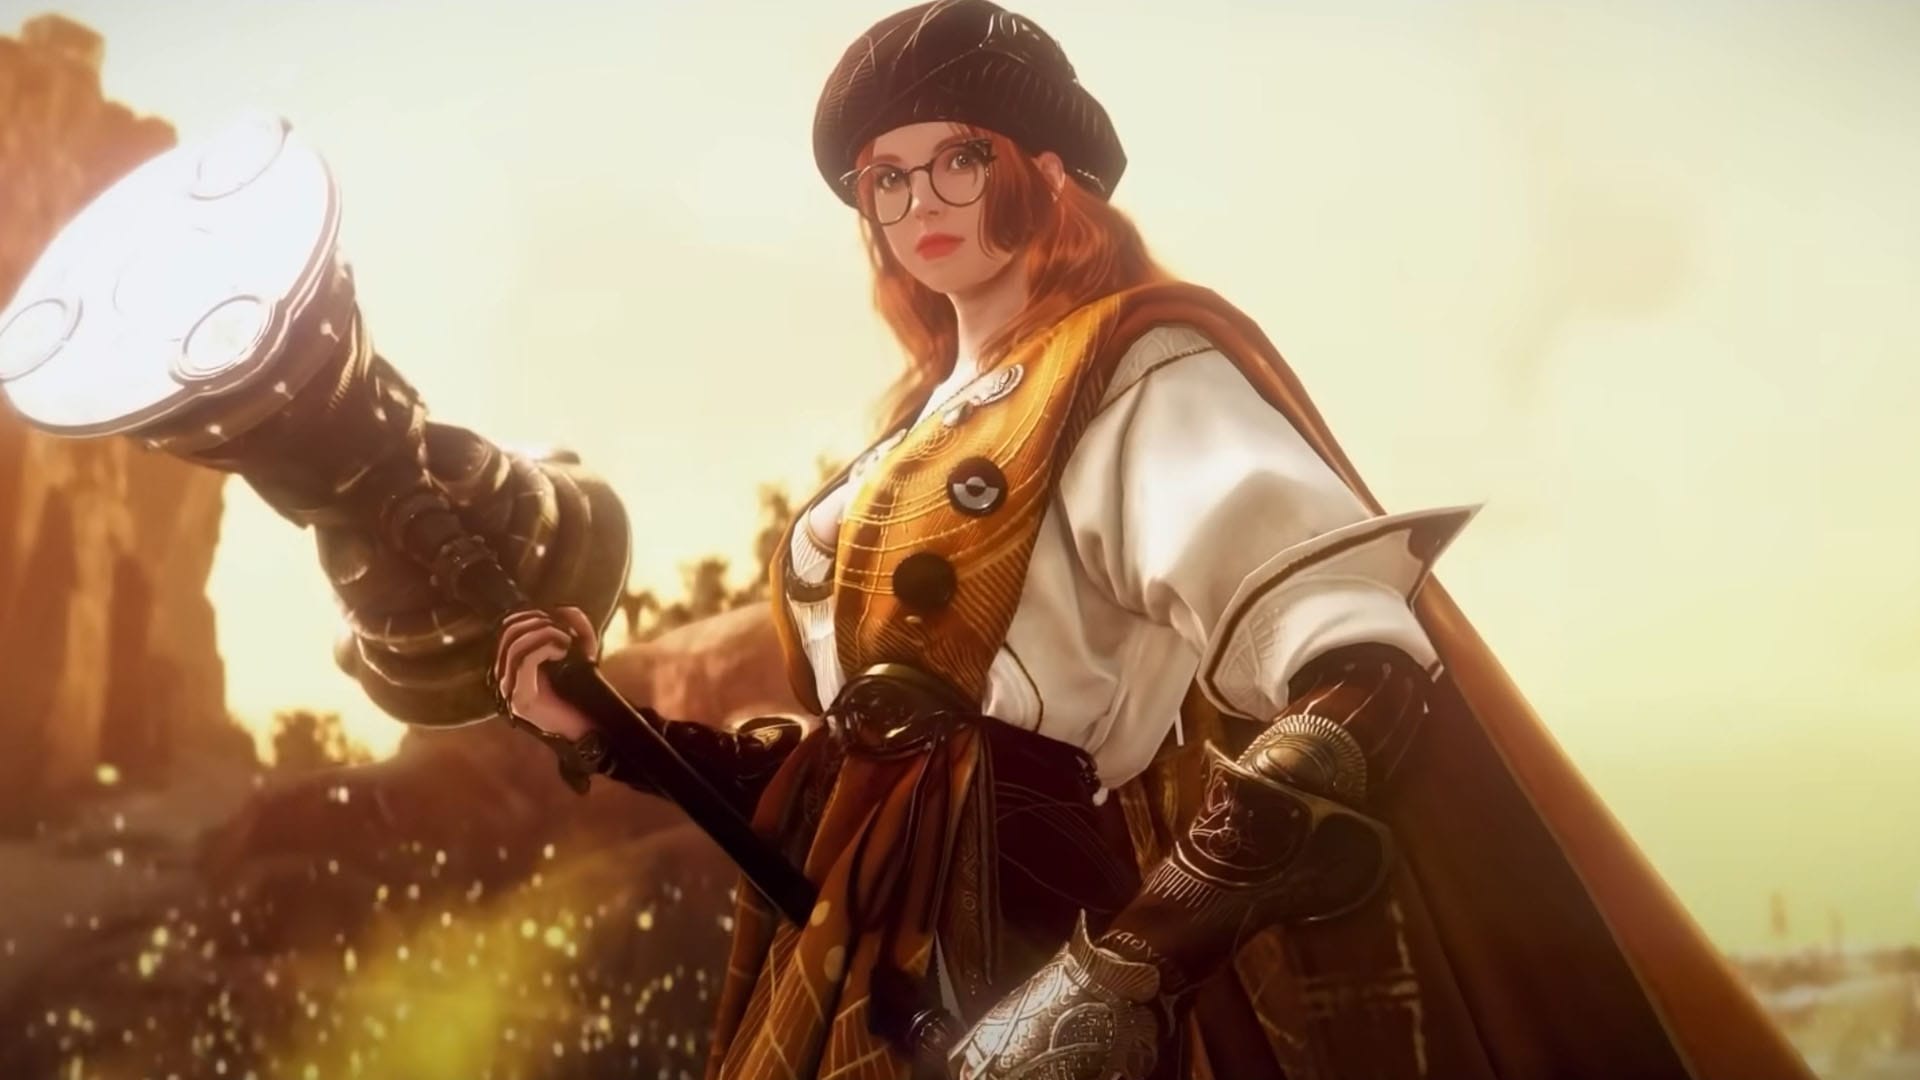 Black Desert Coming to PS5 and Xbox Series X|S, New Classes, Seoul Region, and More Announced